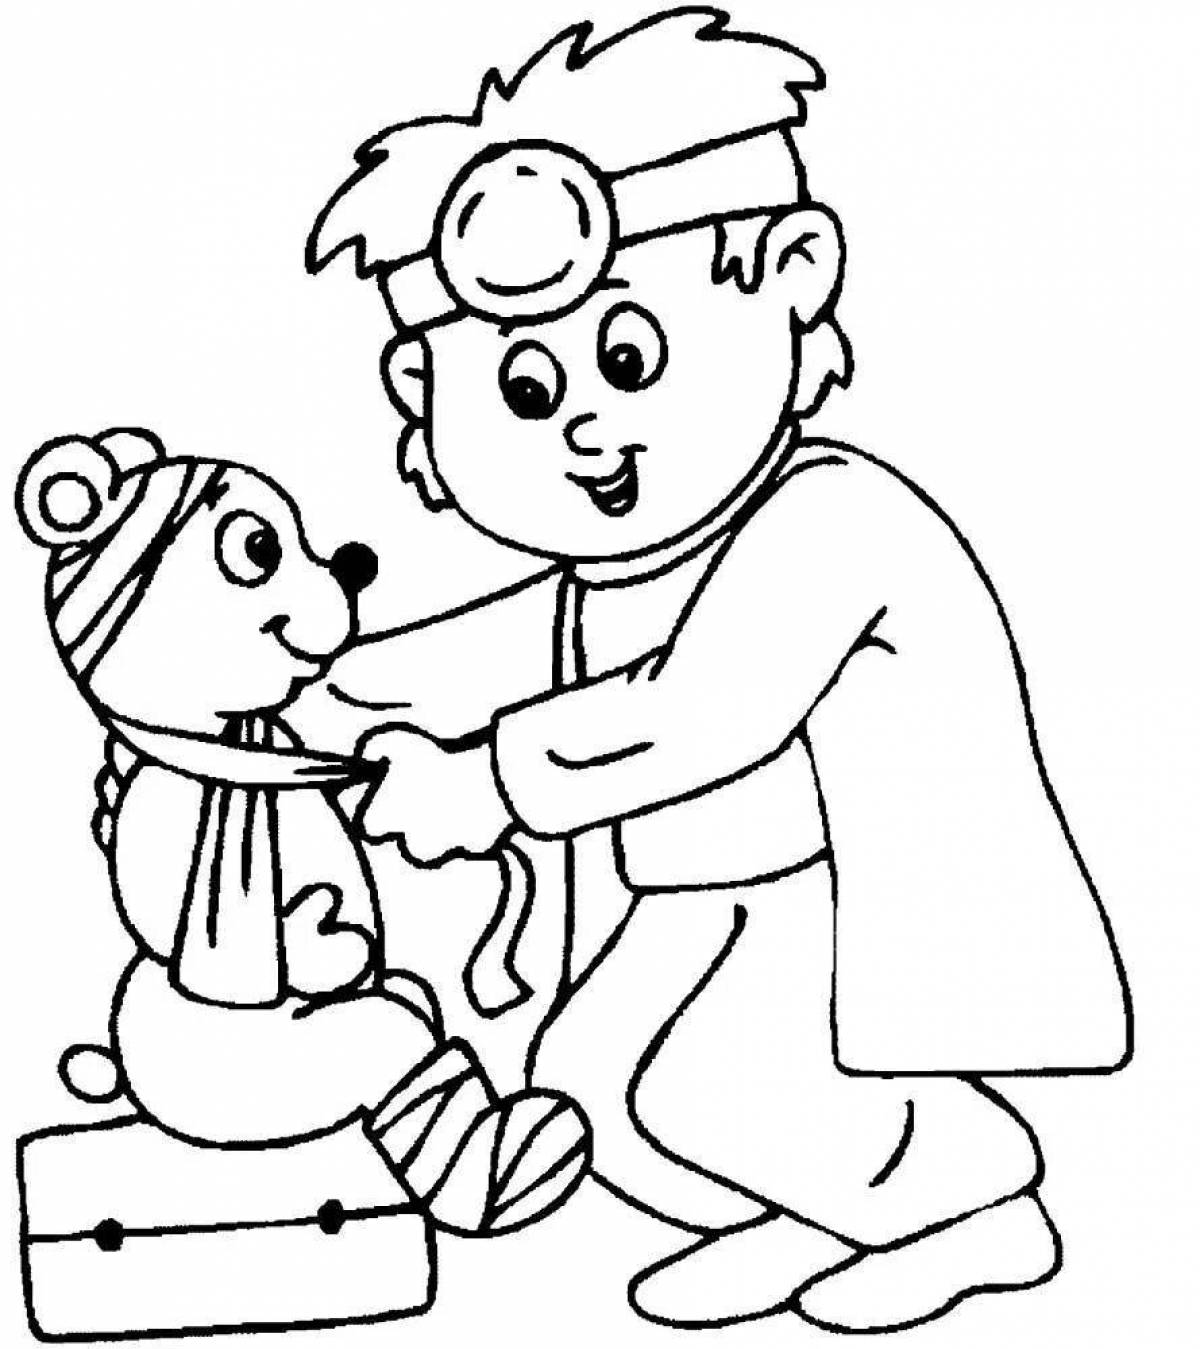 Entertaining coloring book profession of a doctor